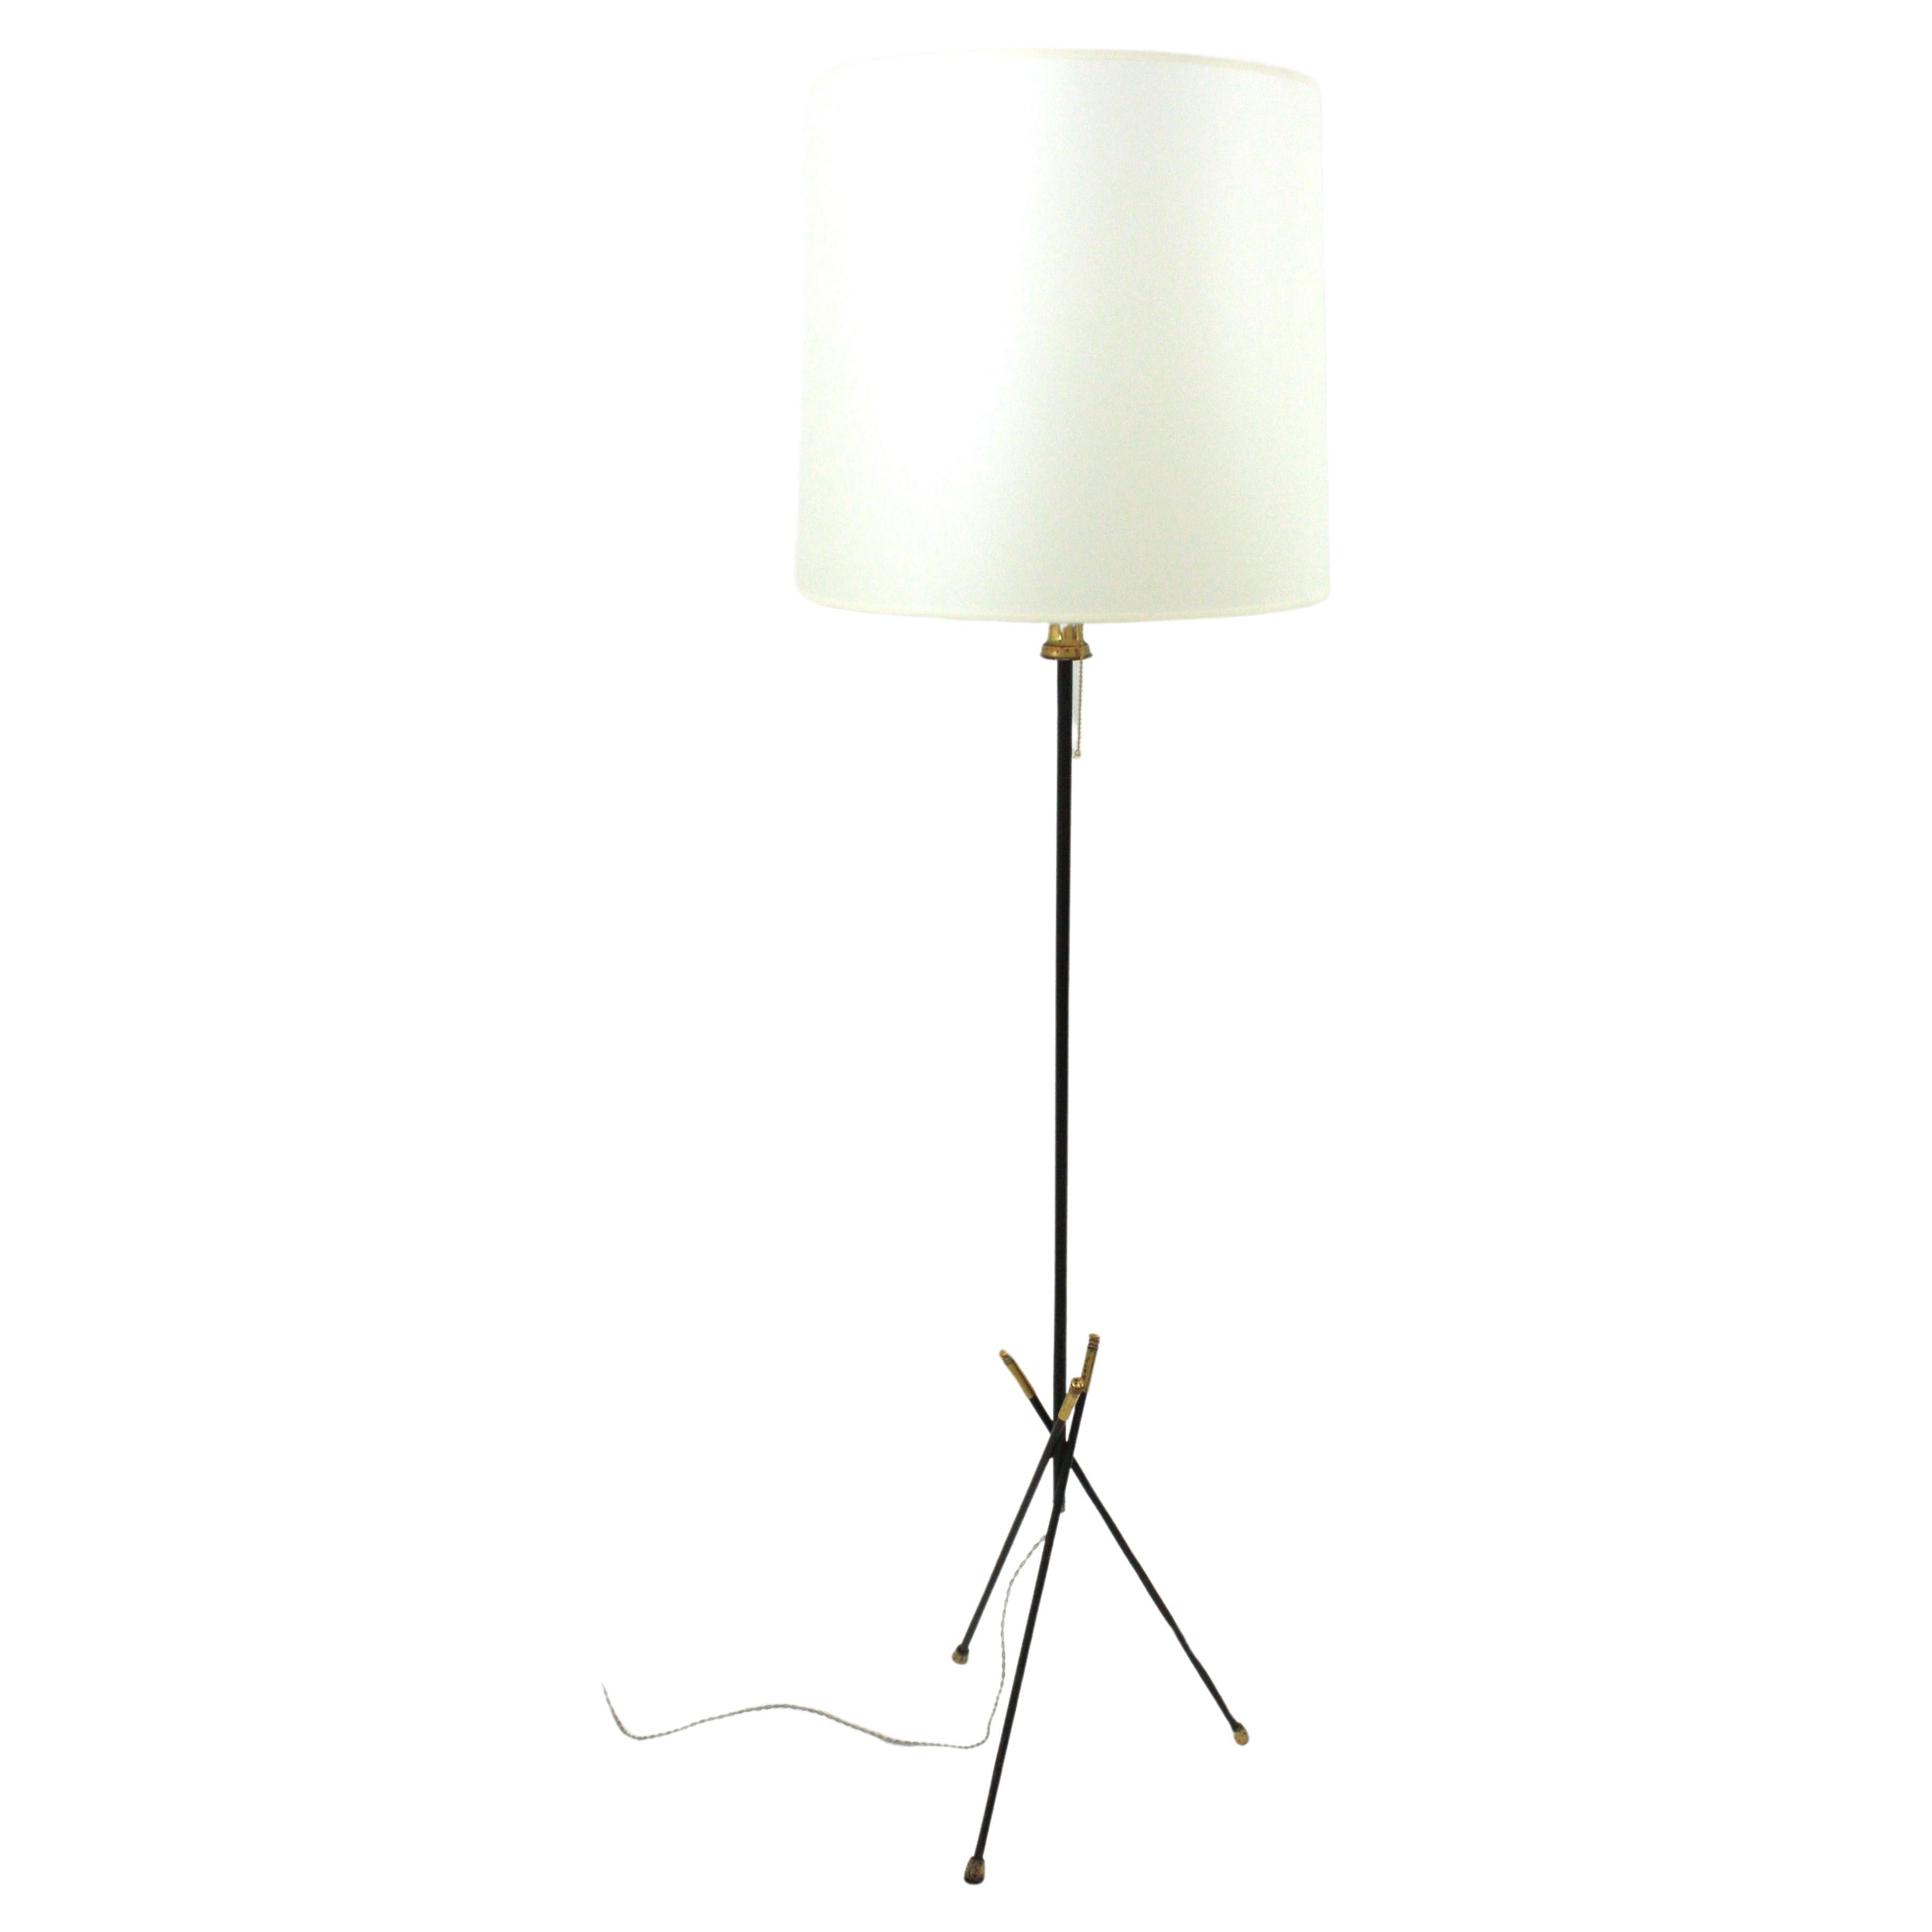 Black Lacquered Tripod Floor Lamp, Iron, Brass. France, 1950s
Tripod floor lamp made in France at the fifties.
Black Lacquer and Brass details.
Newly wired with 1 E27 bulb holder.
Lampshade is not included
Measures: 132 cm H x 38 cm W x 33 cm D
